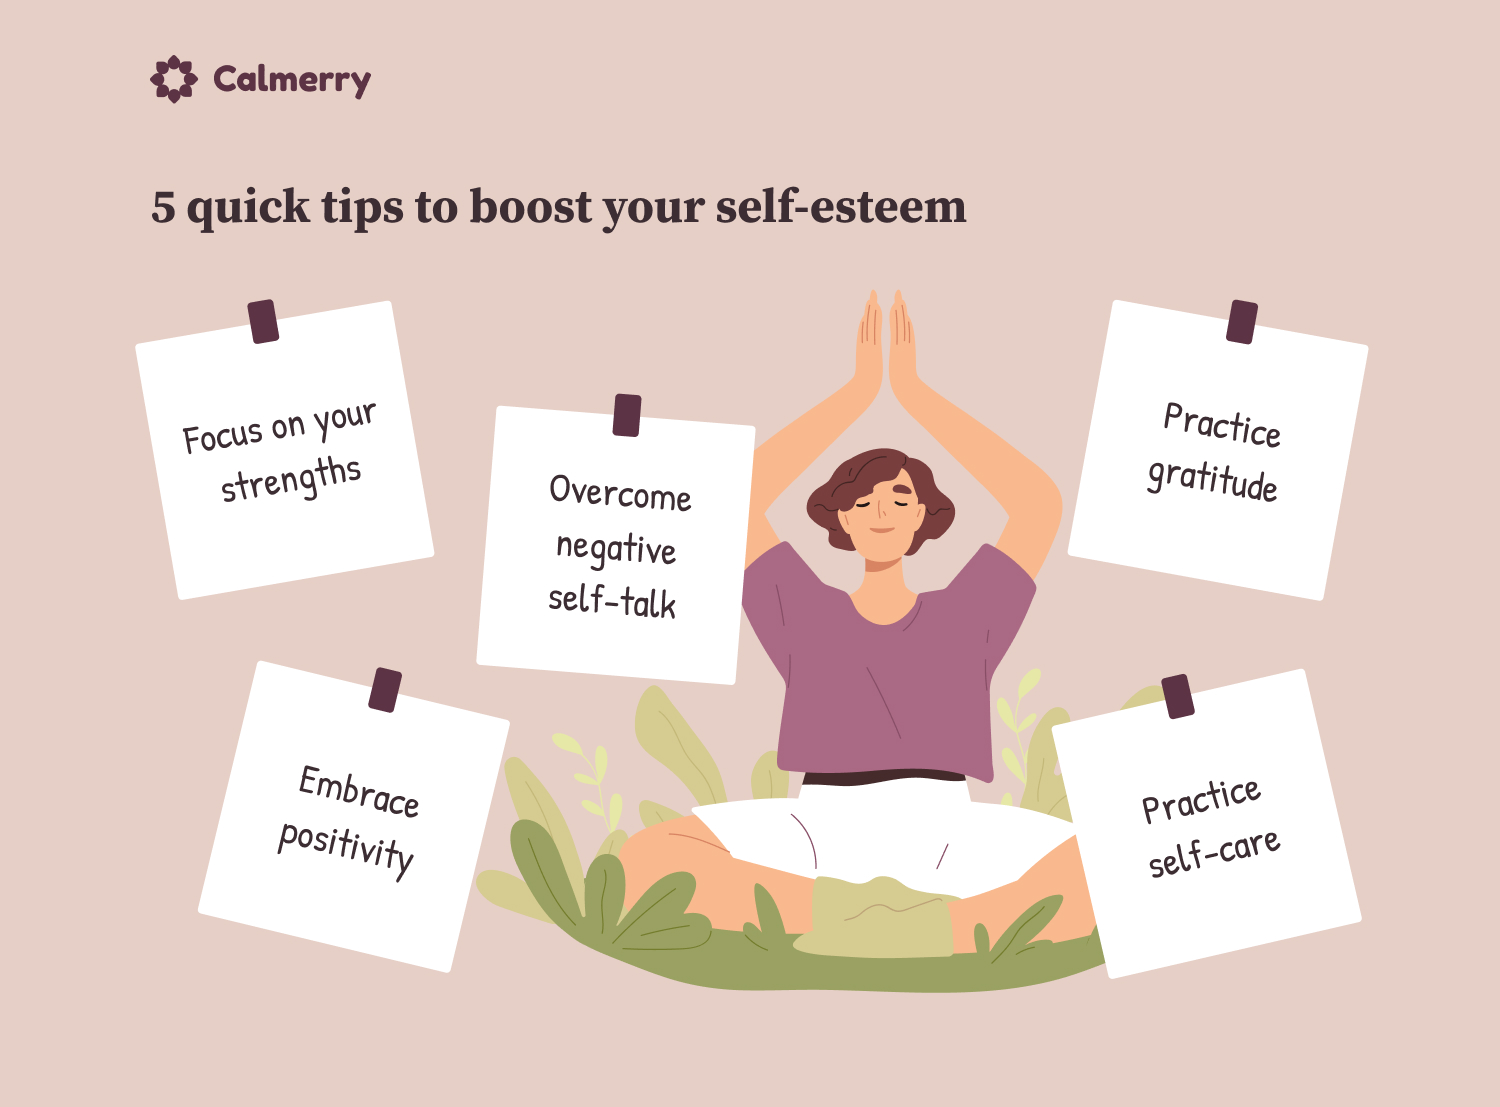 5 quick tips to boost your self-esteem